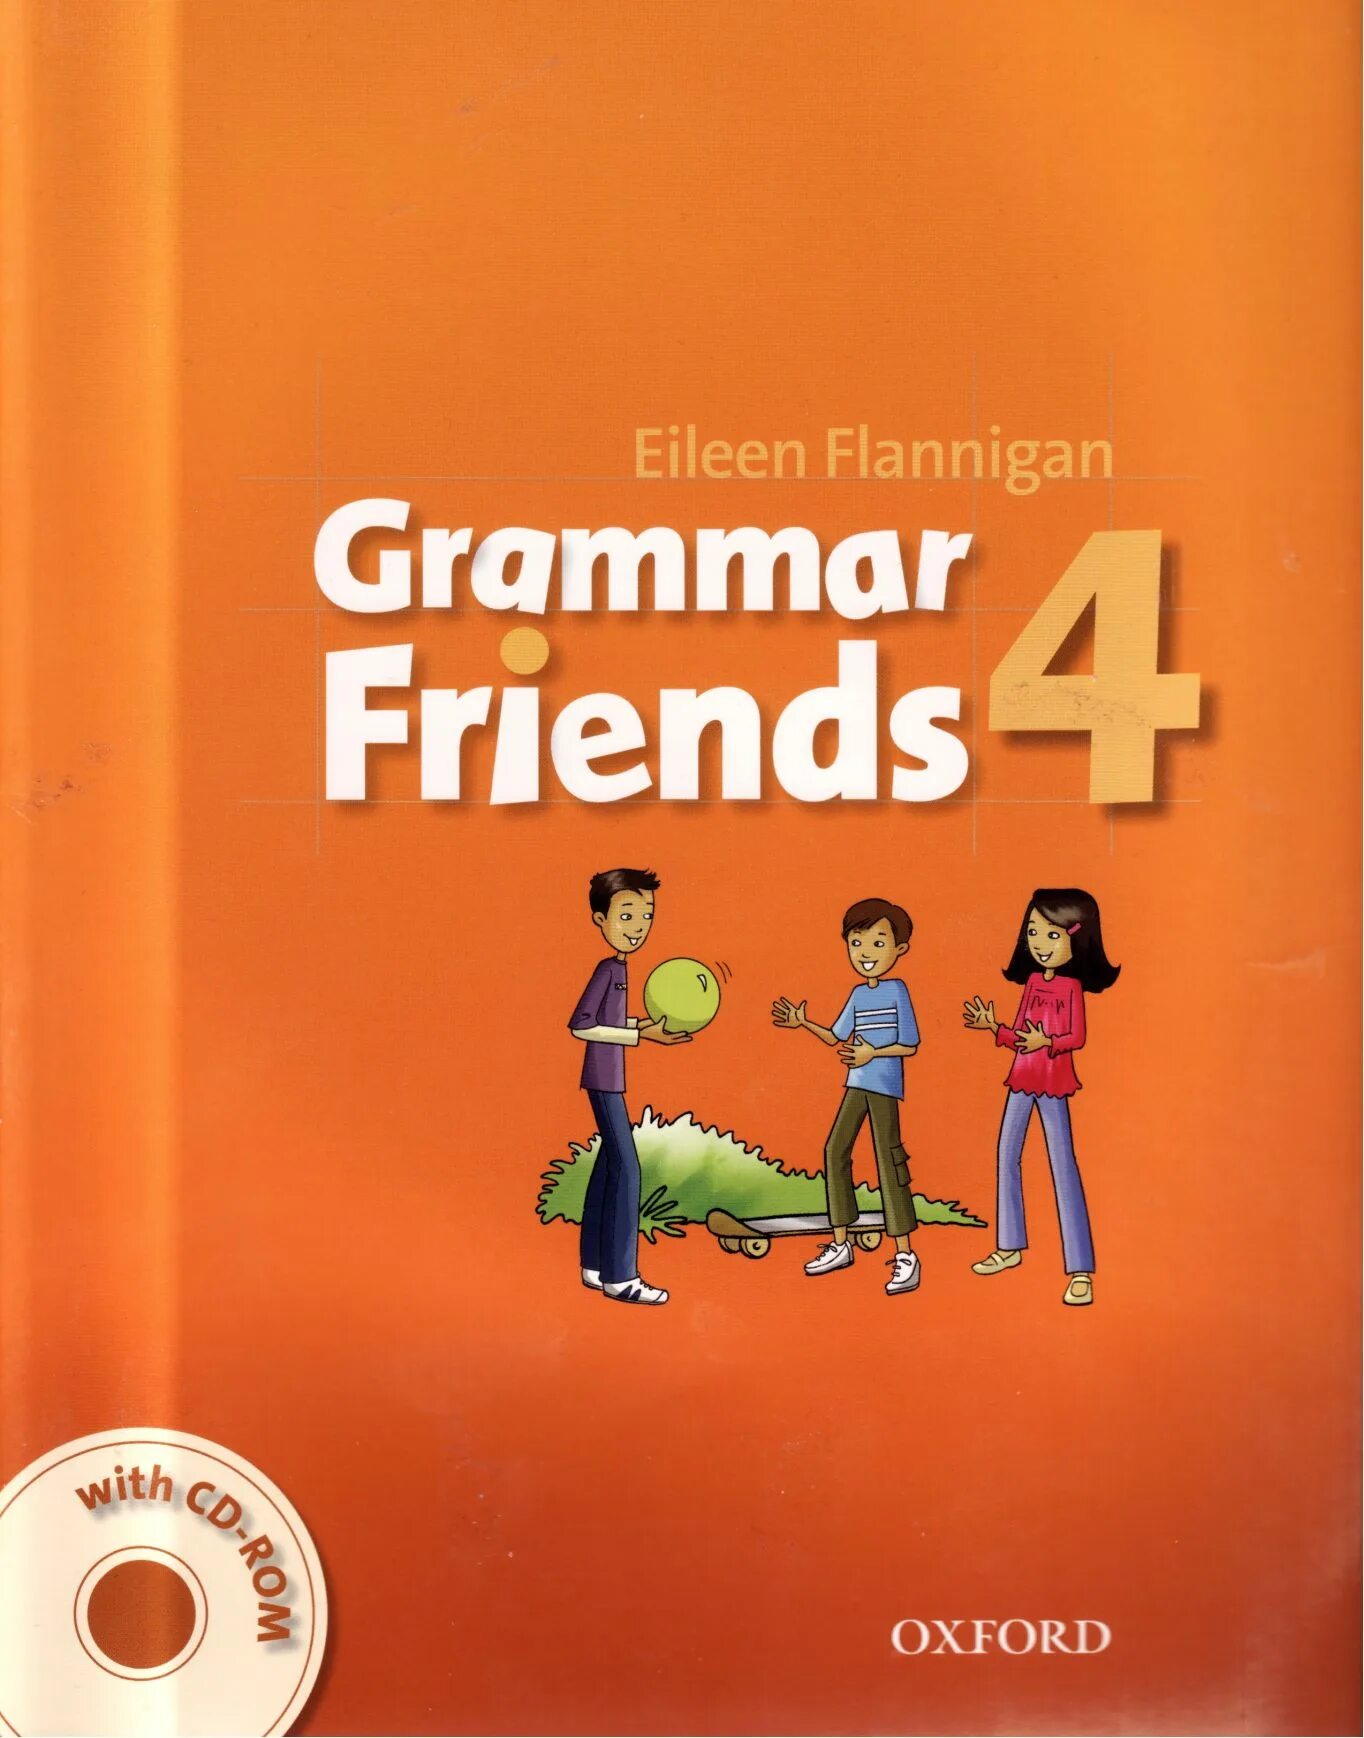 Family student book. Грамматика Family and friends 4. Английский язык Family and friends 4 Grammar Frends ответы. Family and friends грамматика. Family and friends 4 Grammar book.